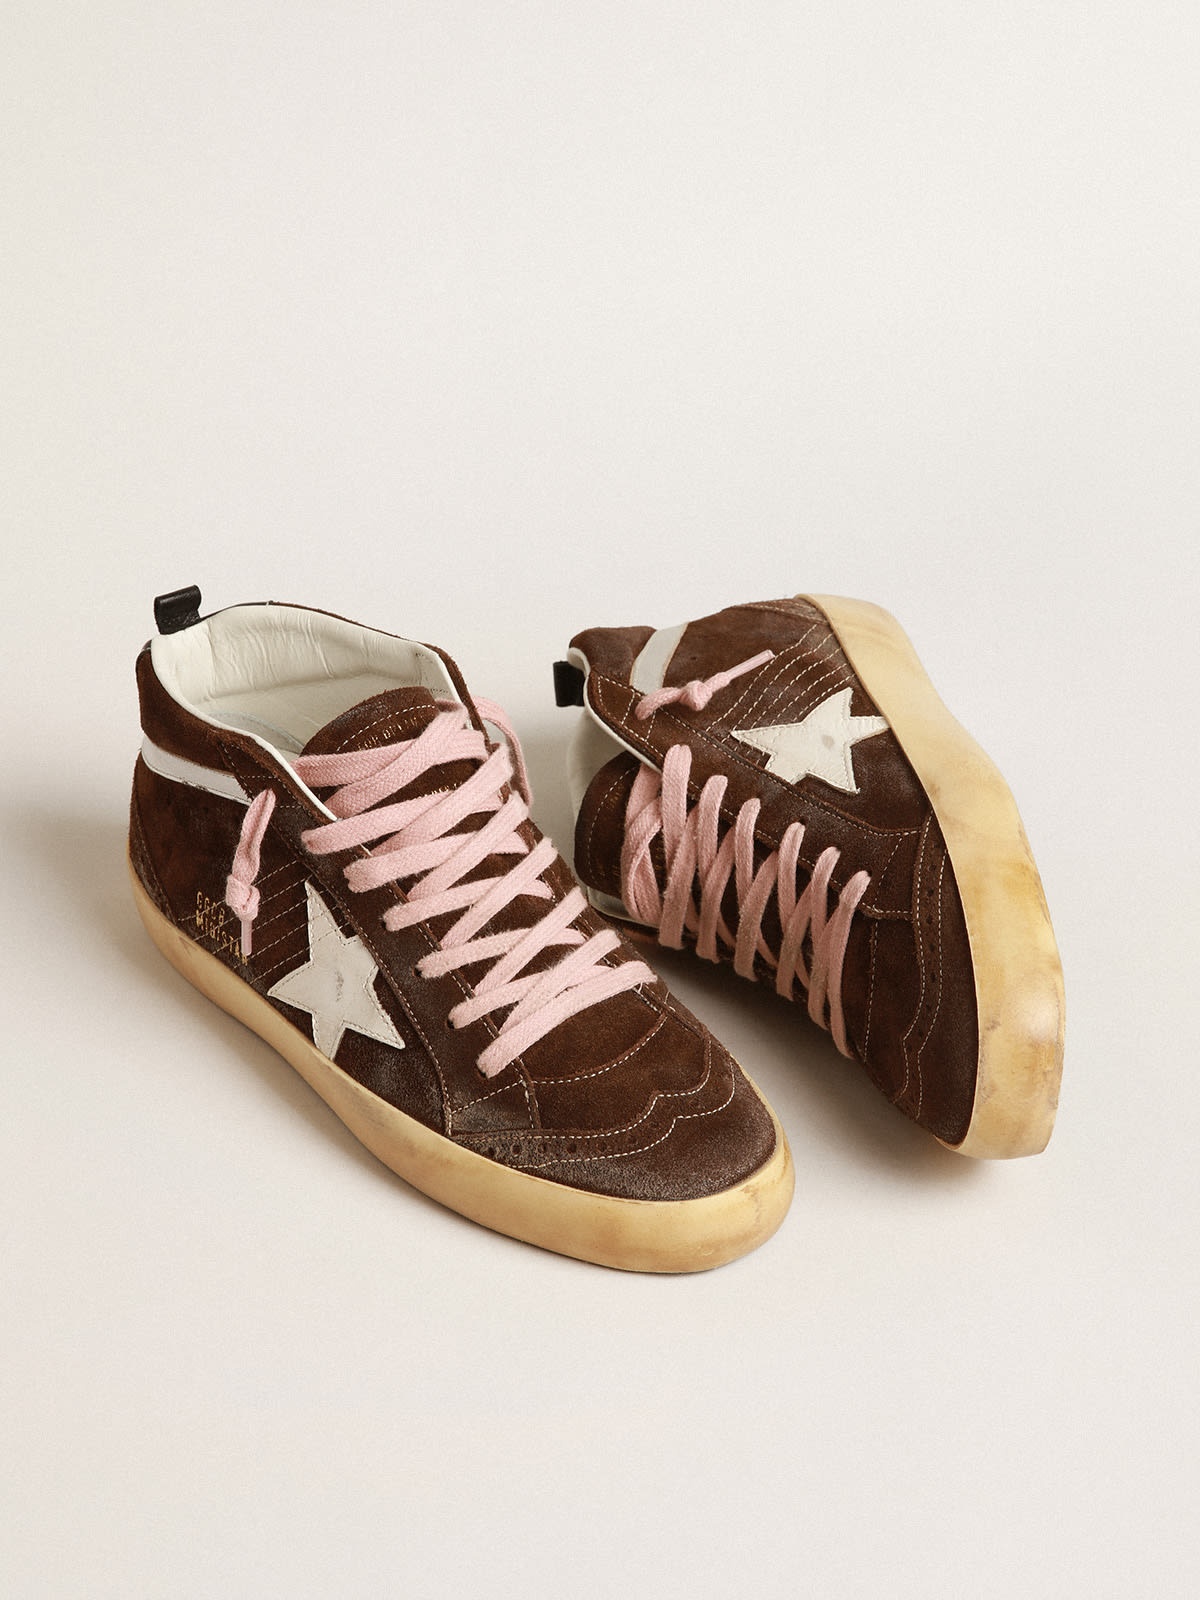 Mid Star in brown suede with white leather star - 2